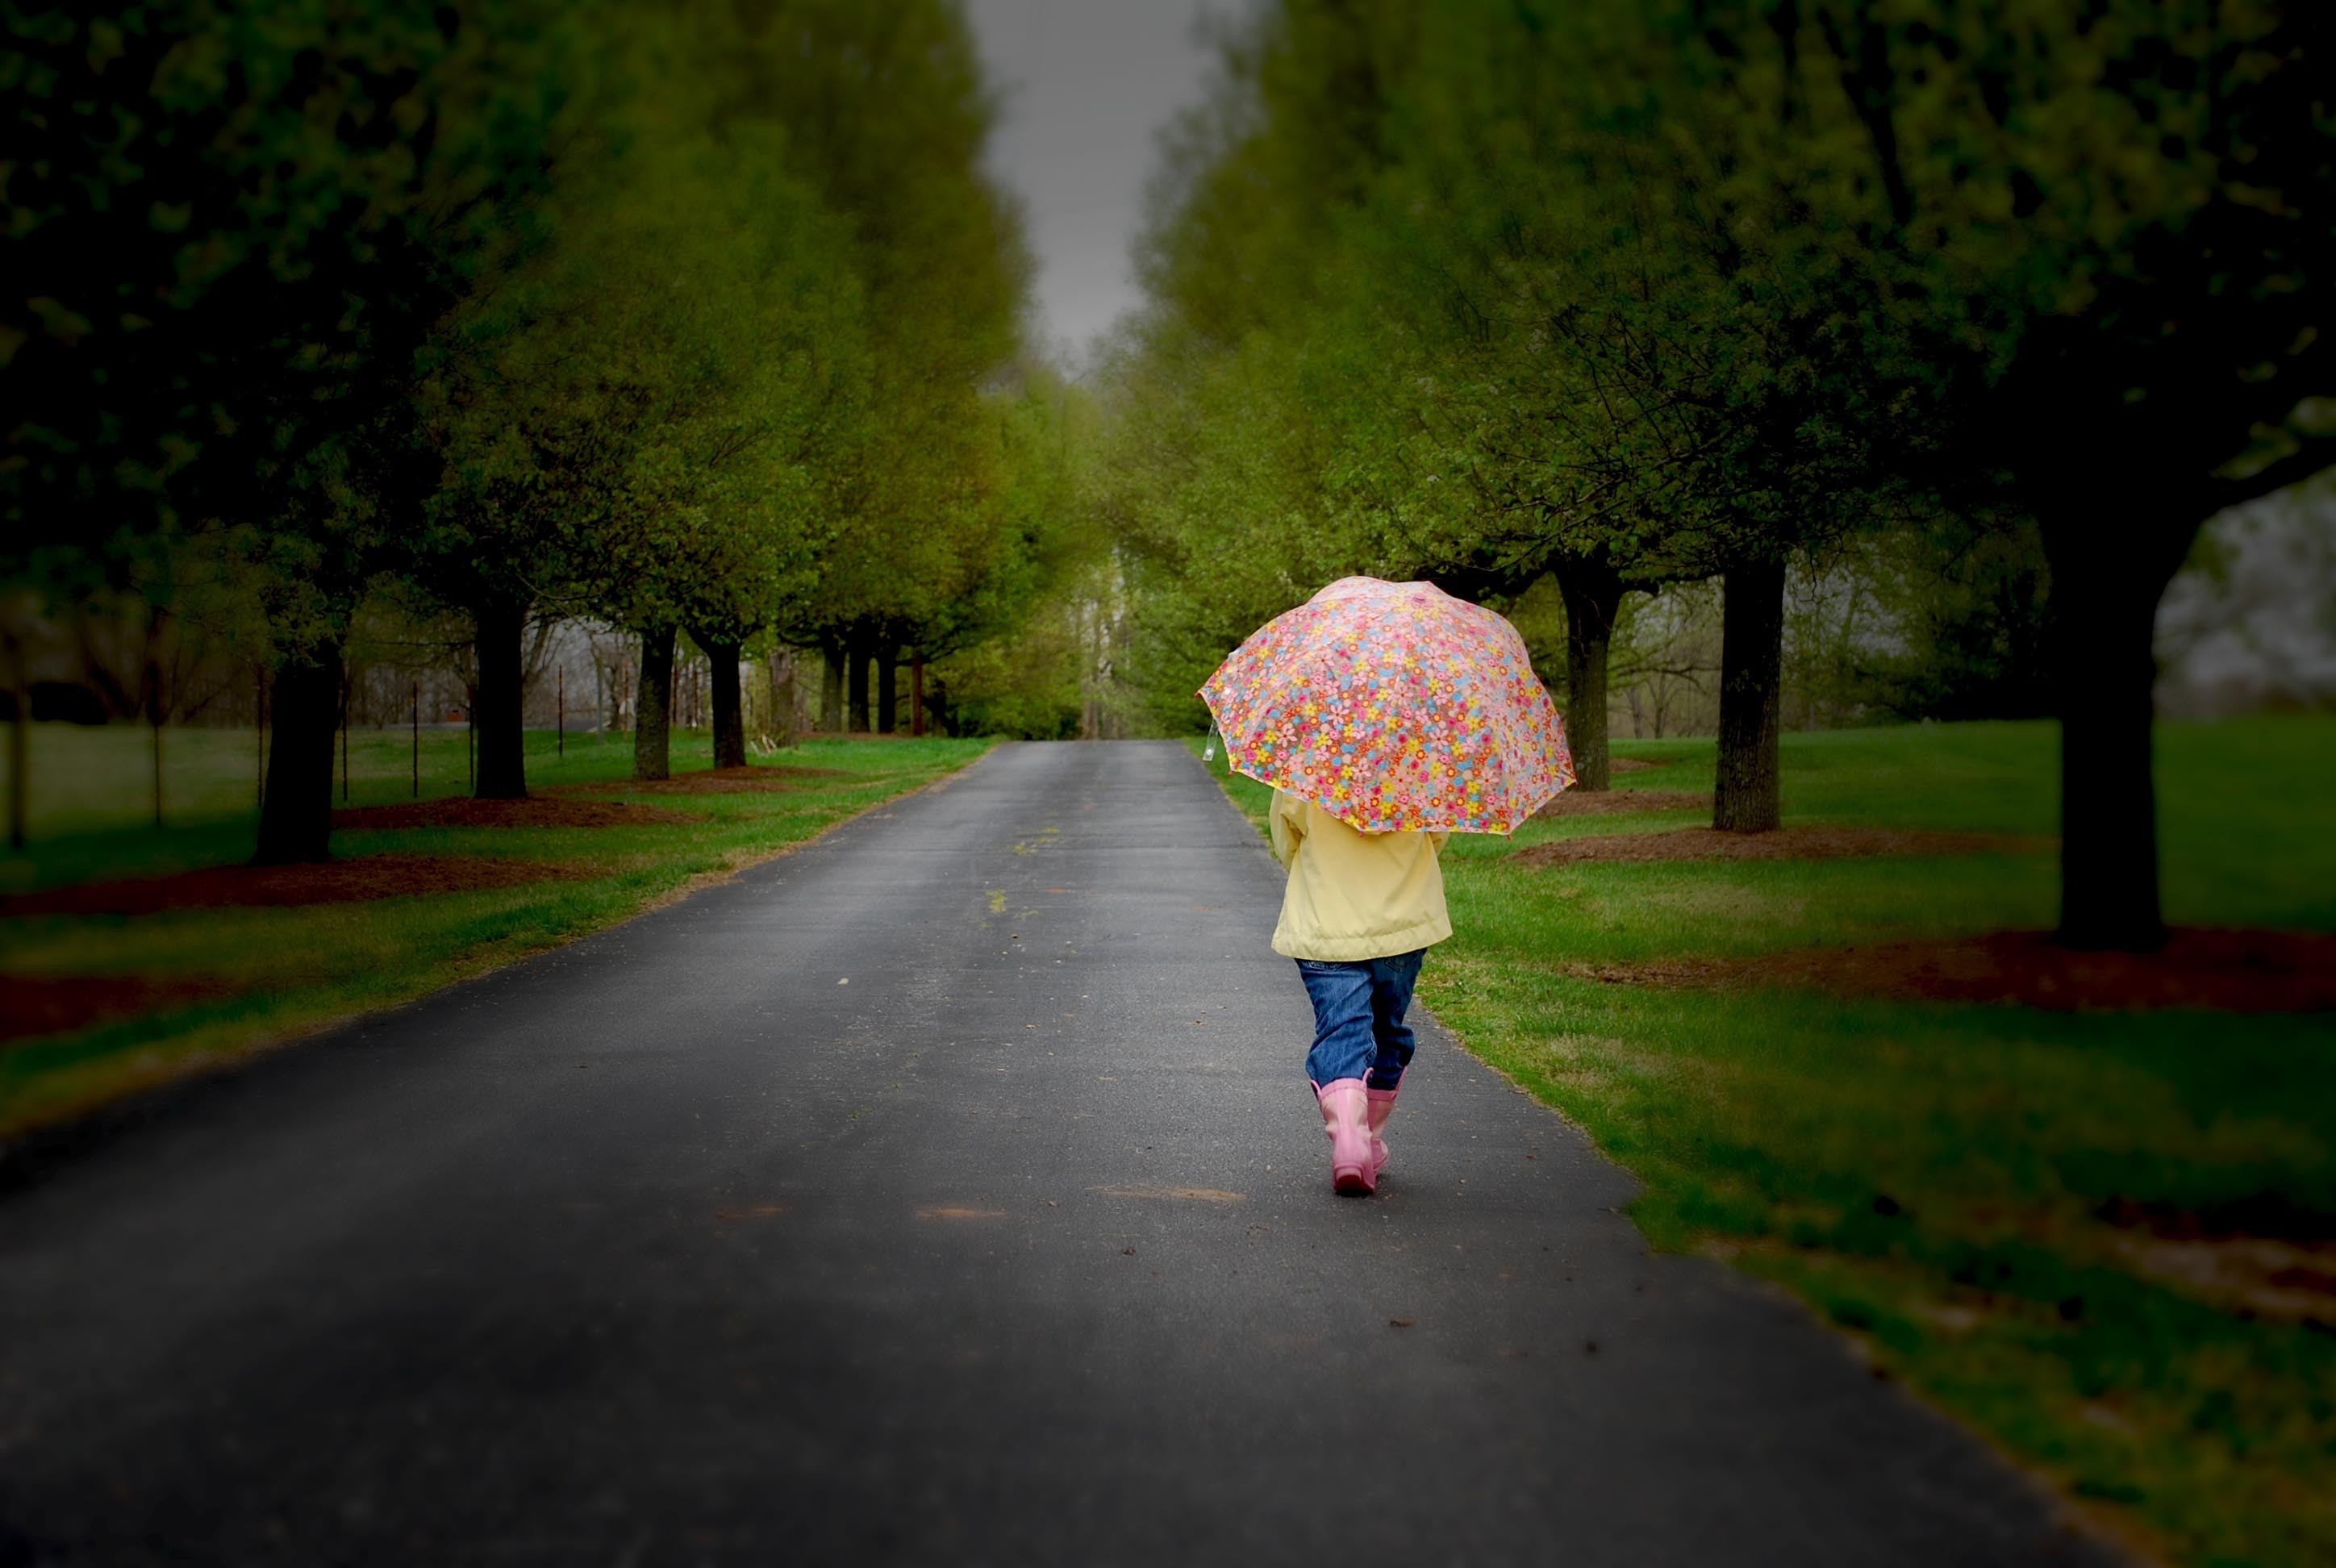 park, wood, miscellanea, miscellaneous, road, tree, stroll, mainly cloudy, overcast, umbrella